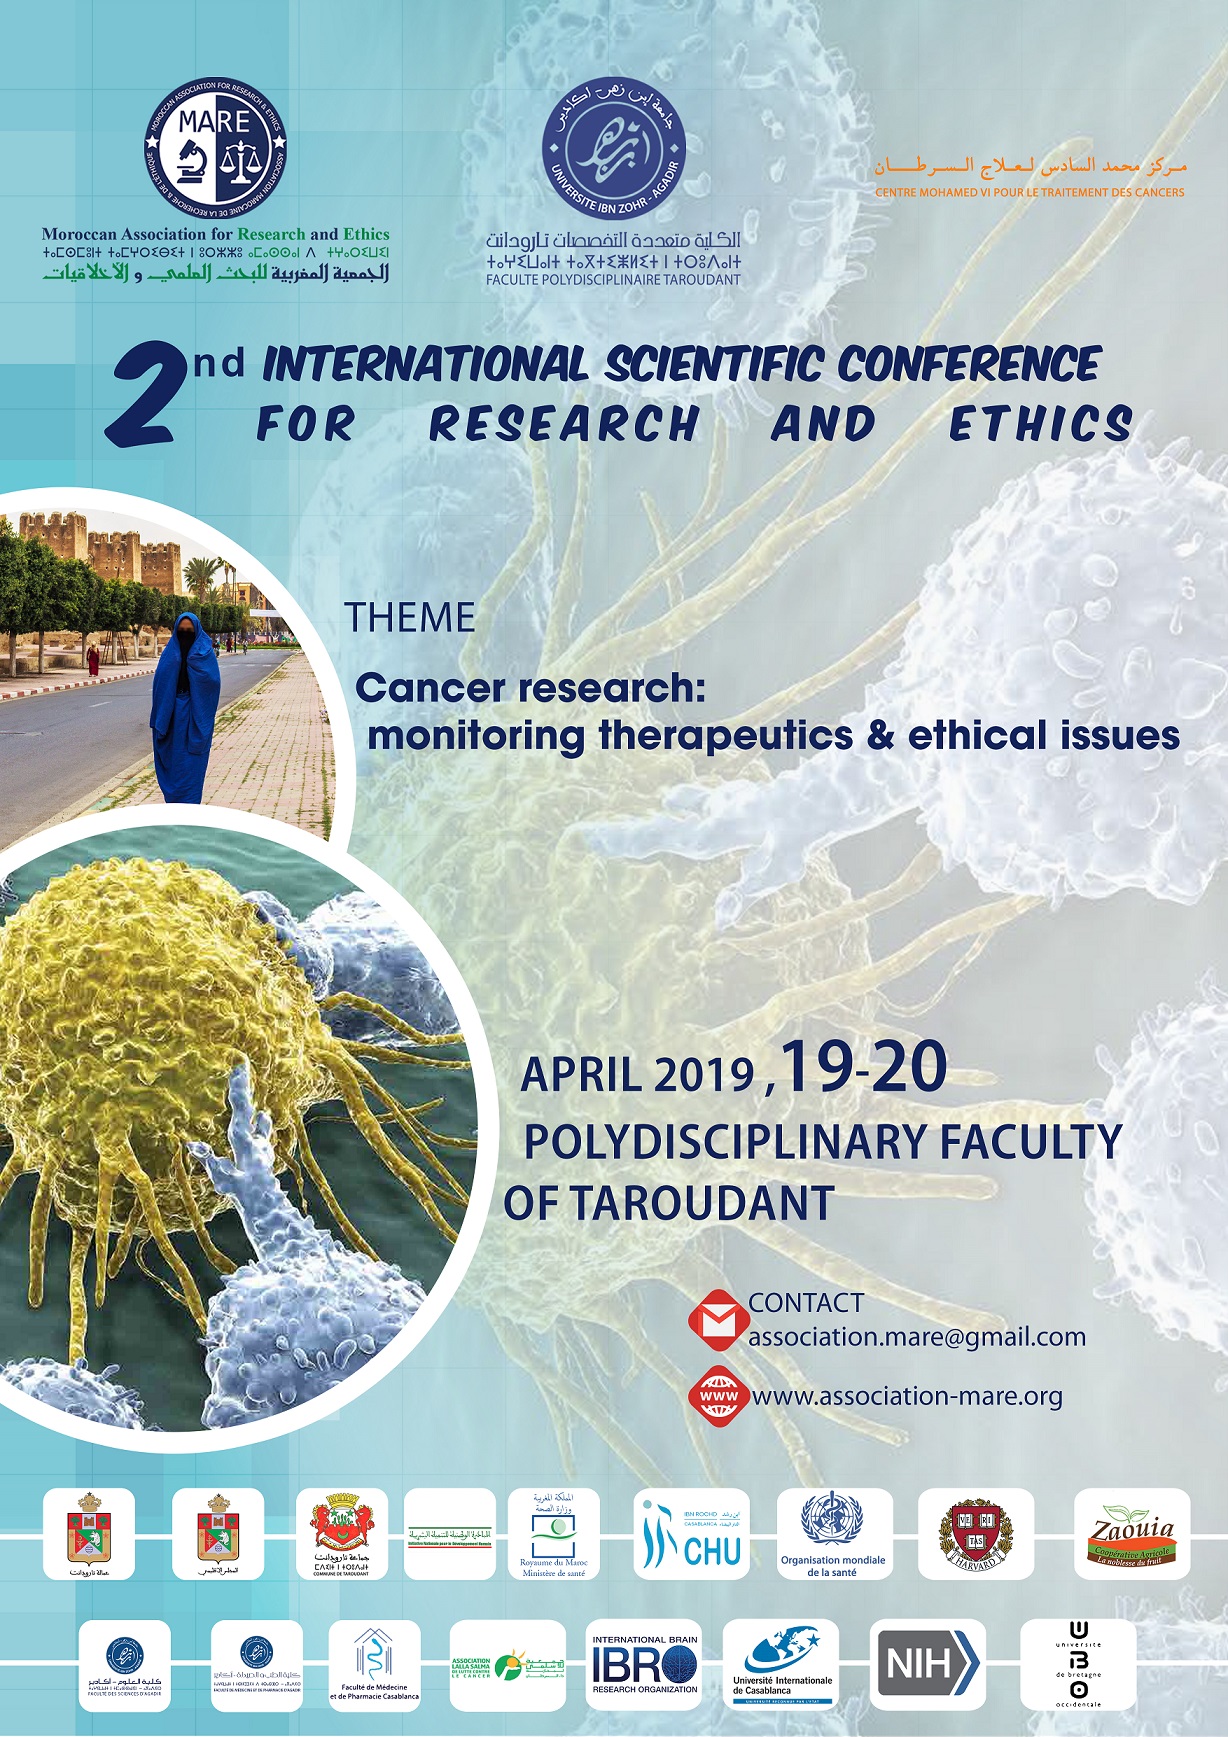 2 nd International Scientific Conference for Research and Ethics